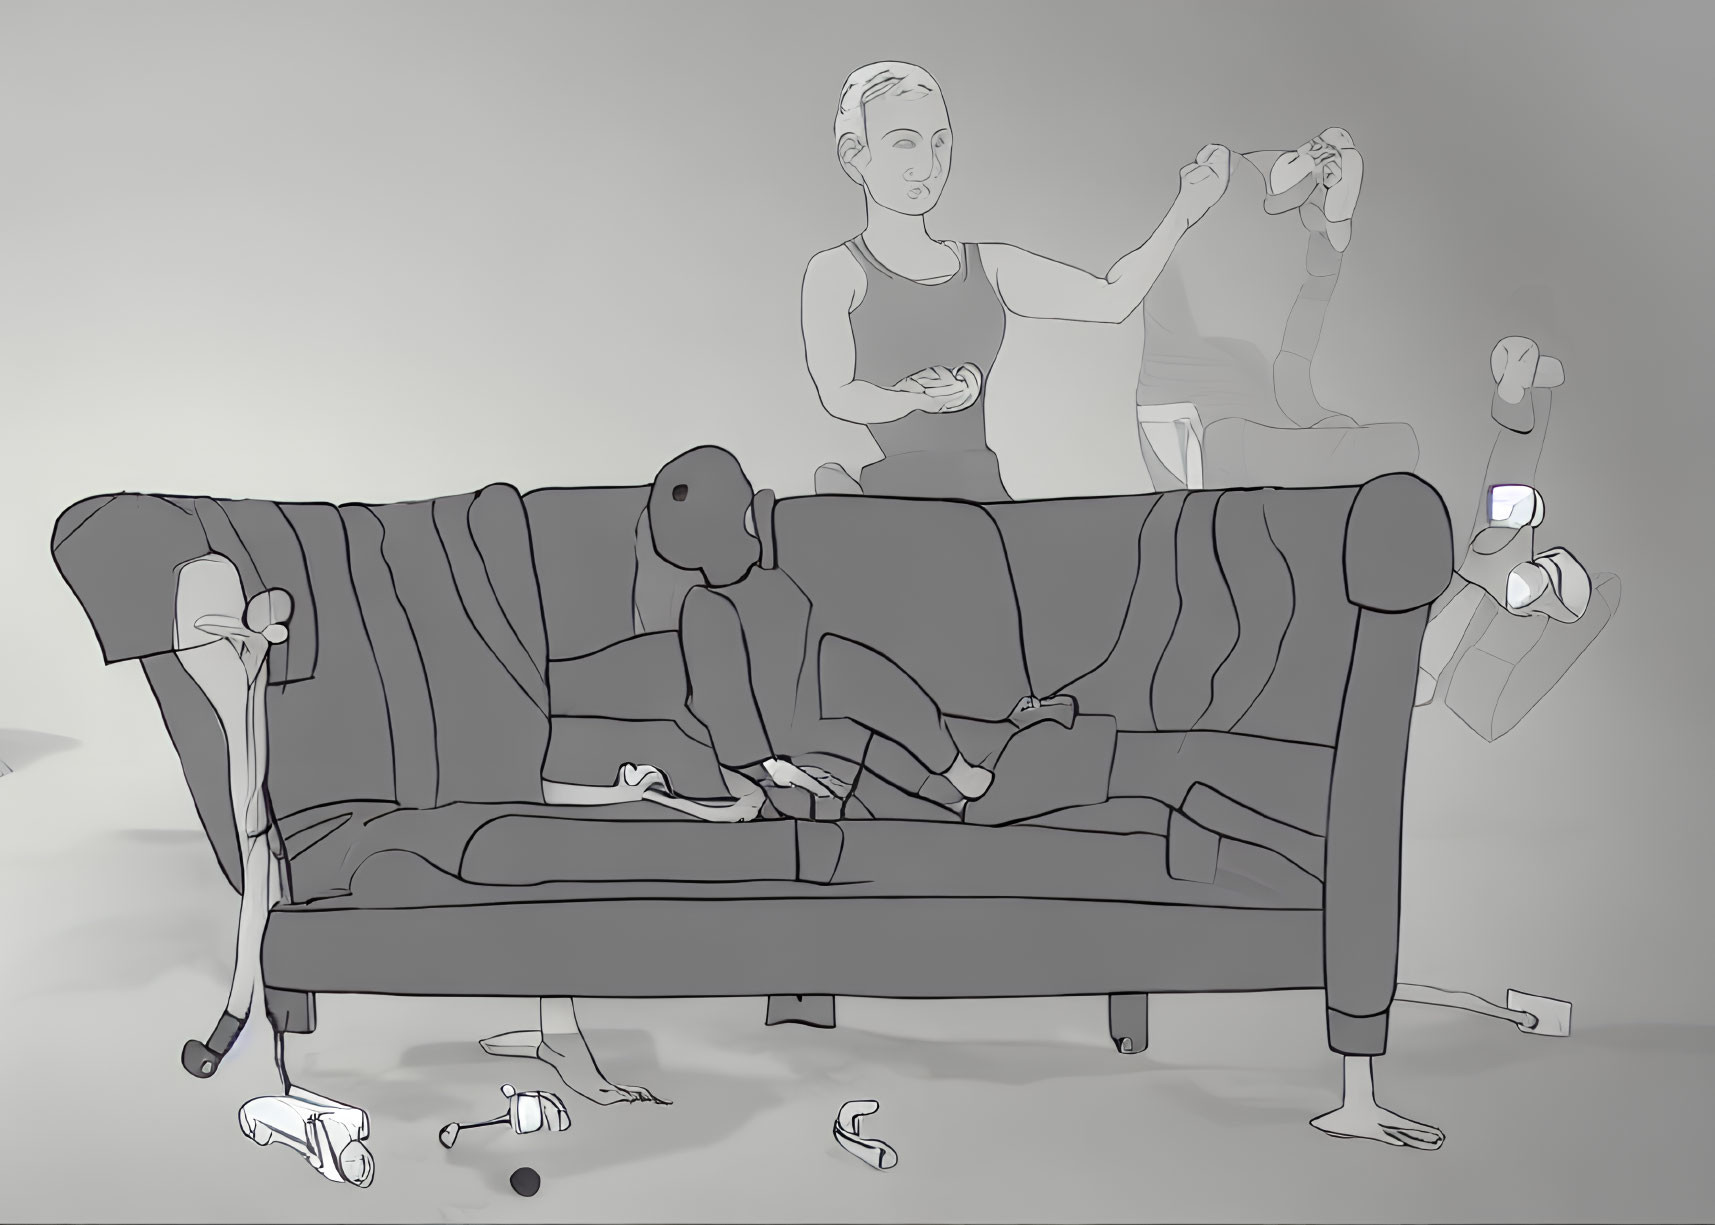 Monochrome illustration of person on couch with VR headset